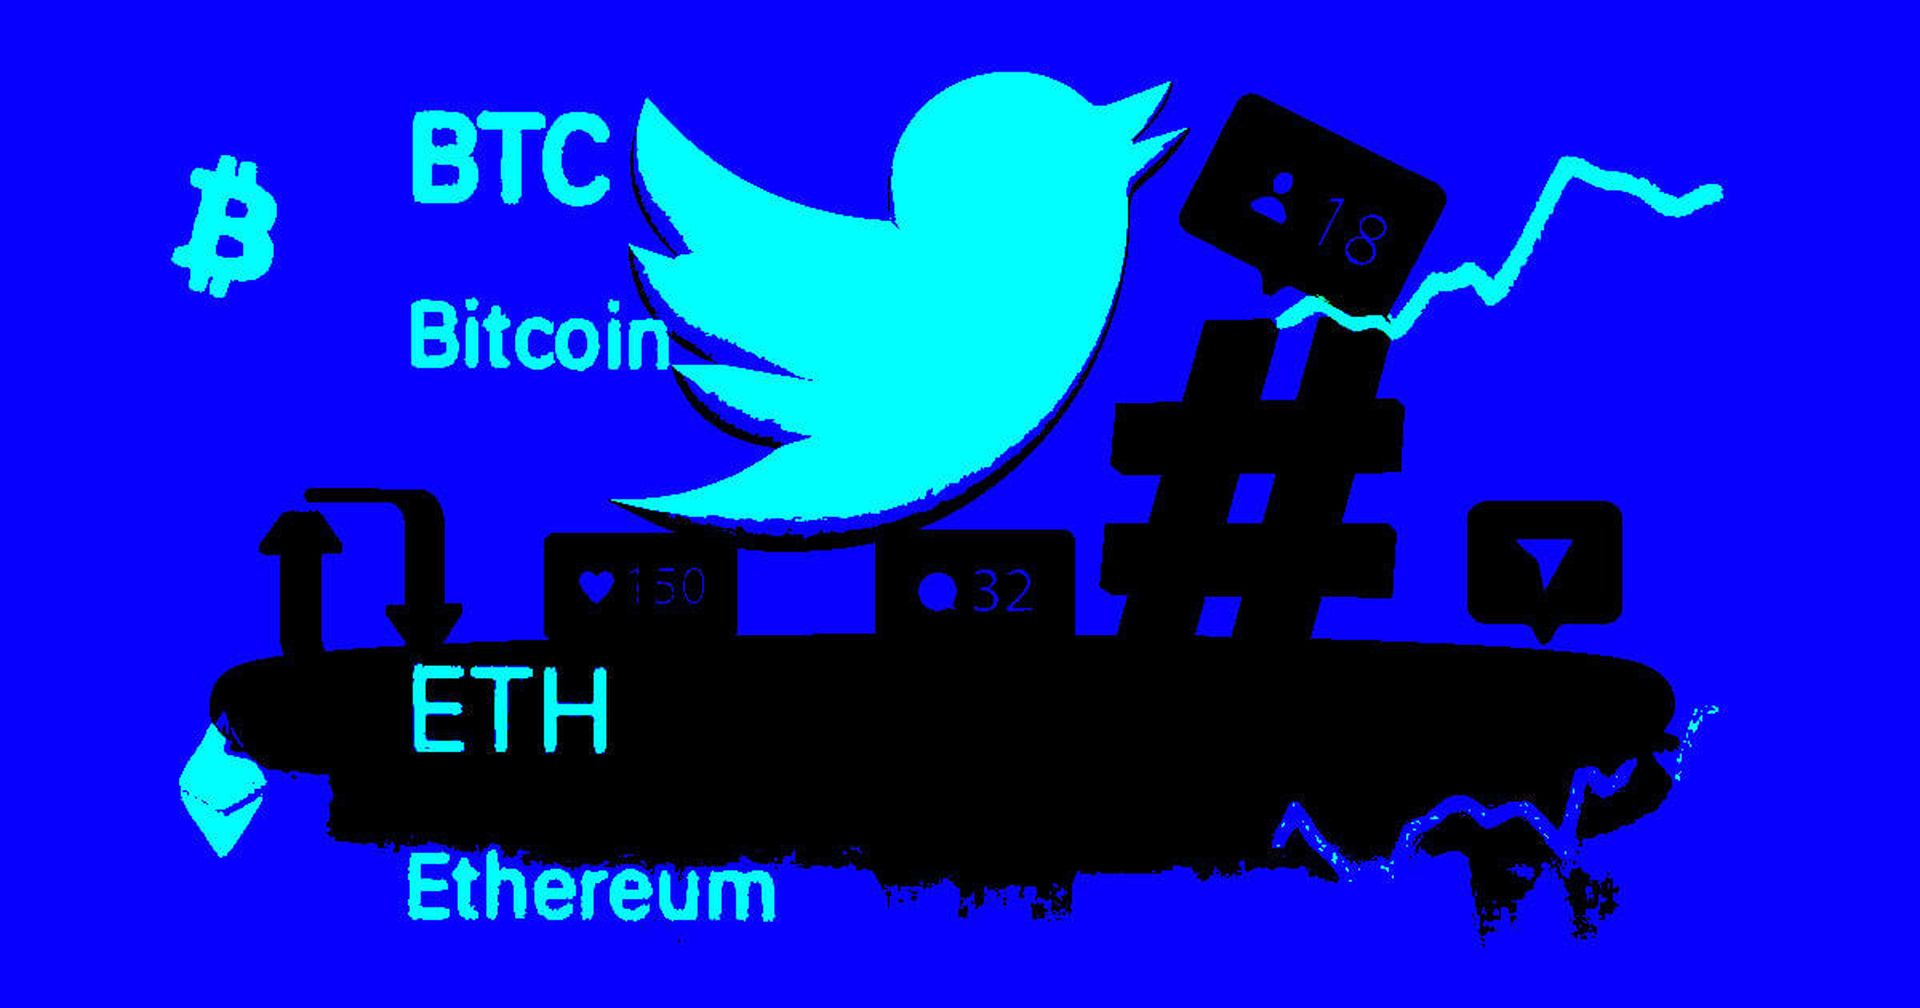 Twitter has implemented a new cryptocurrency tool that allows users to check Bitcoin and Ethereum price charts by just putting their names or tickers into...